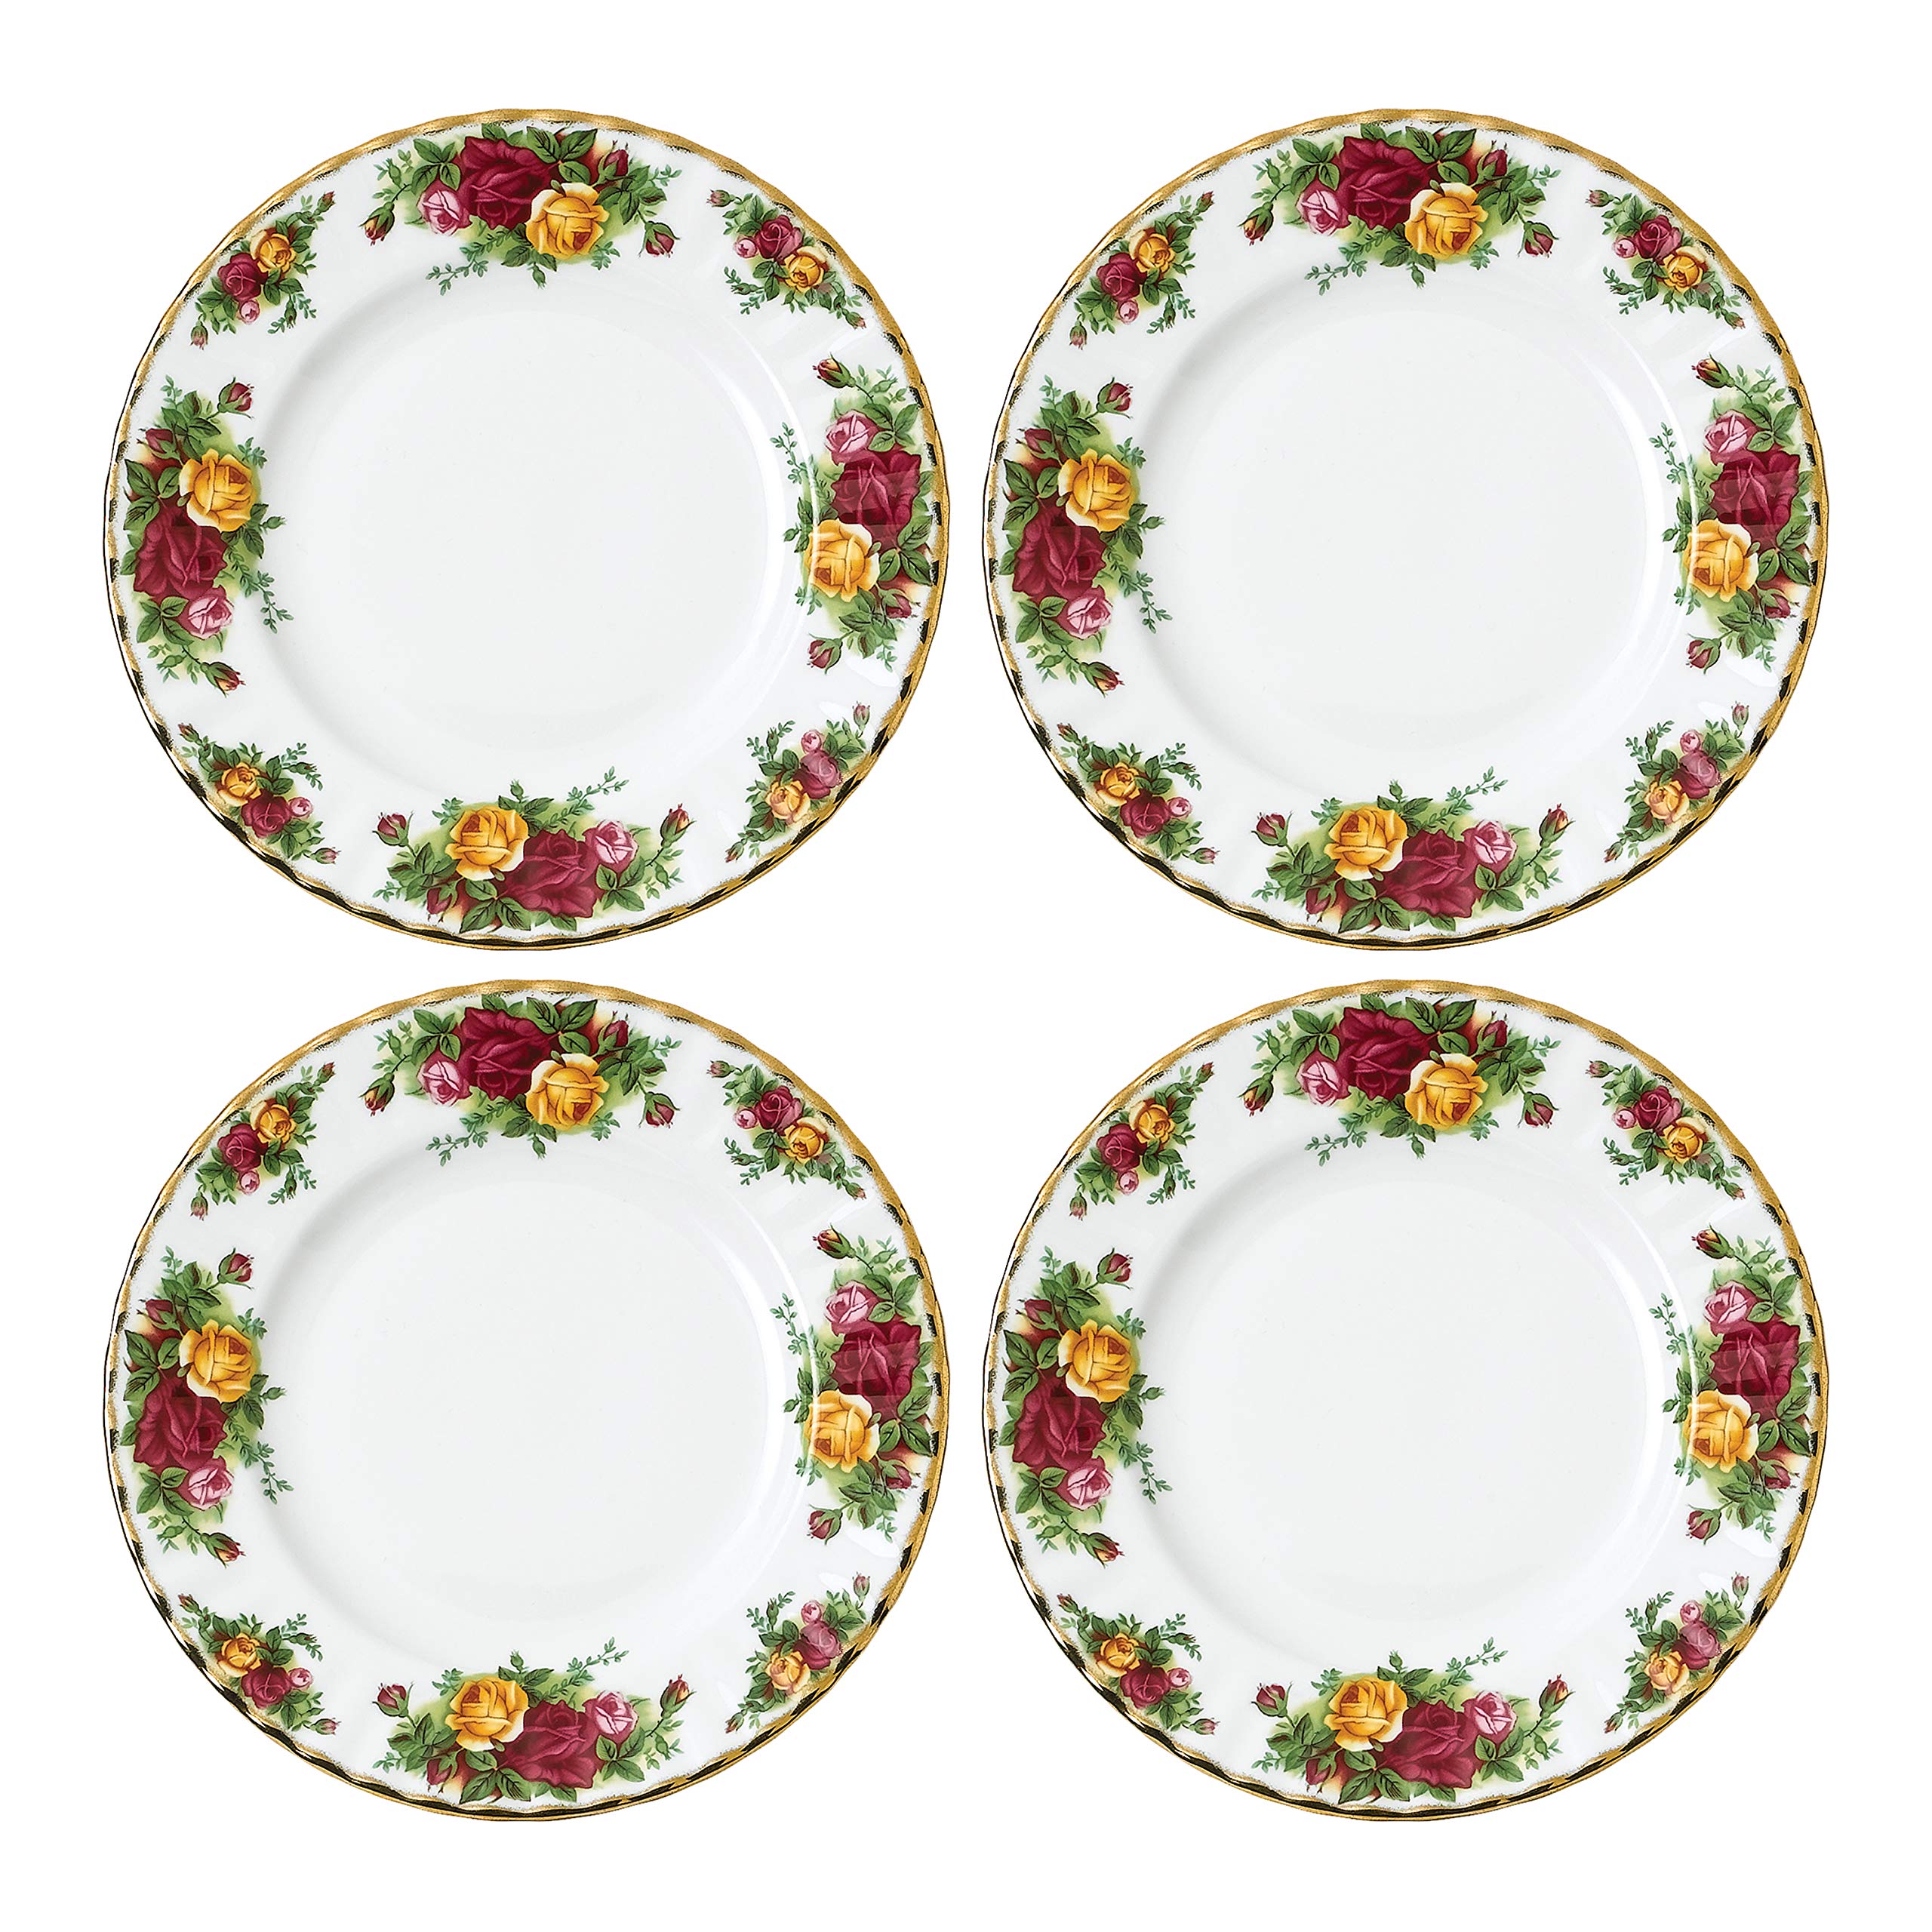 Royal Albert Old Country Roses Set of 4 Salad Plates, 8", Multi